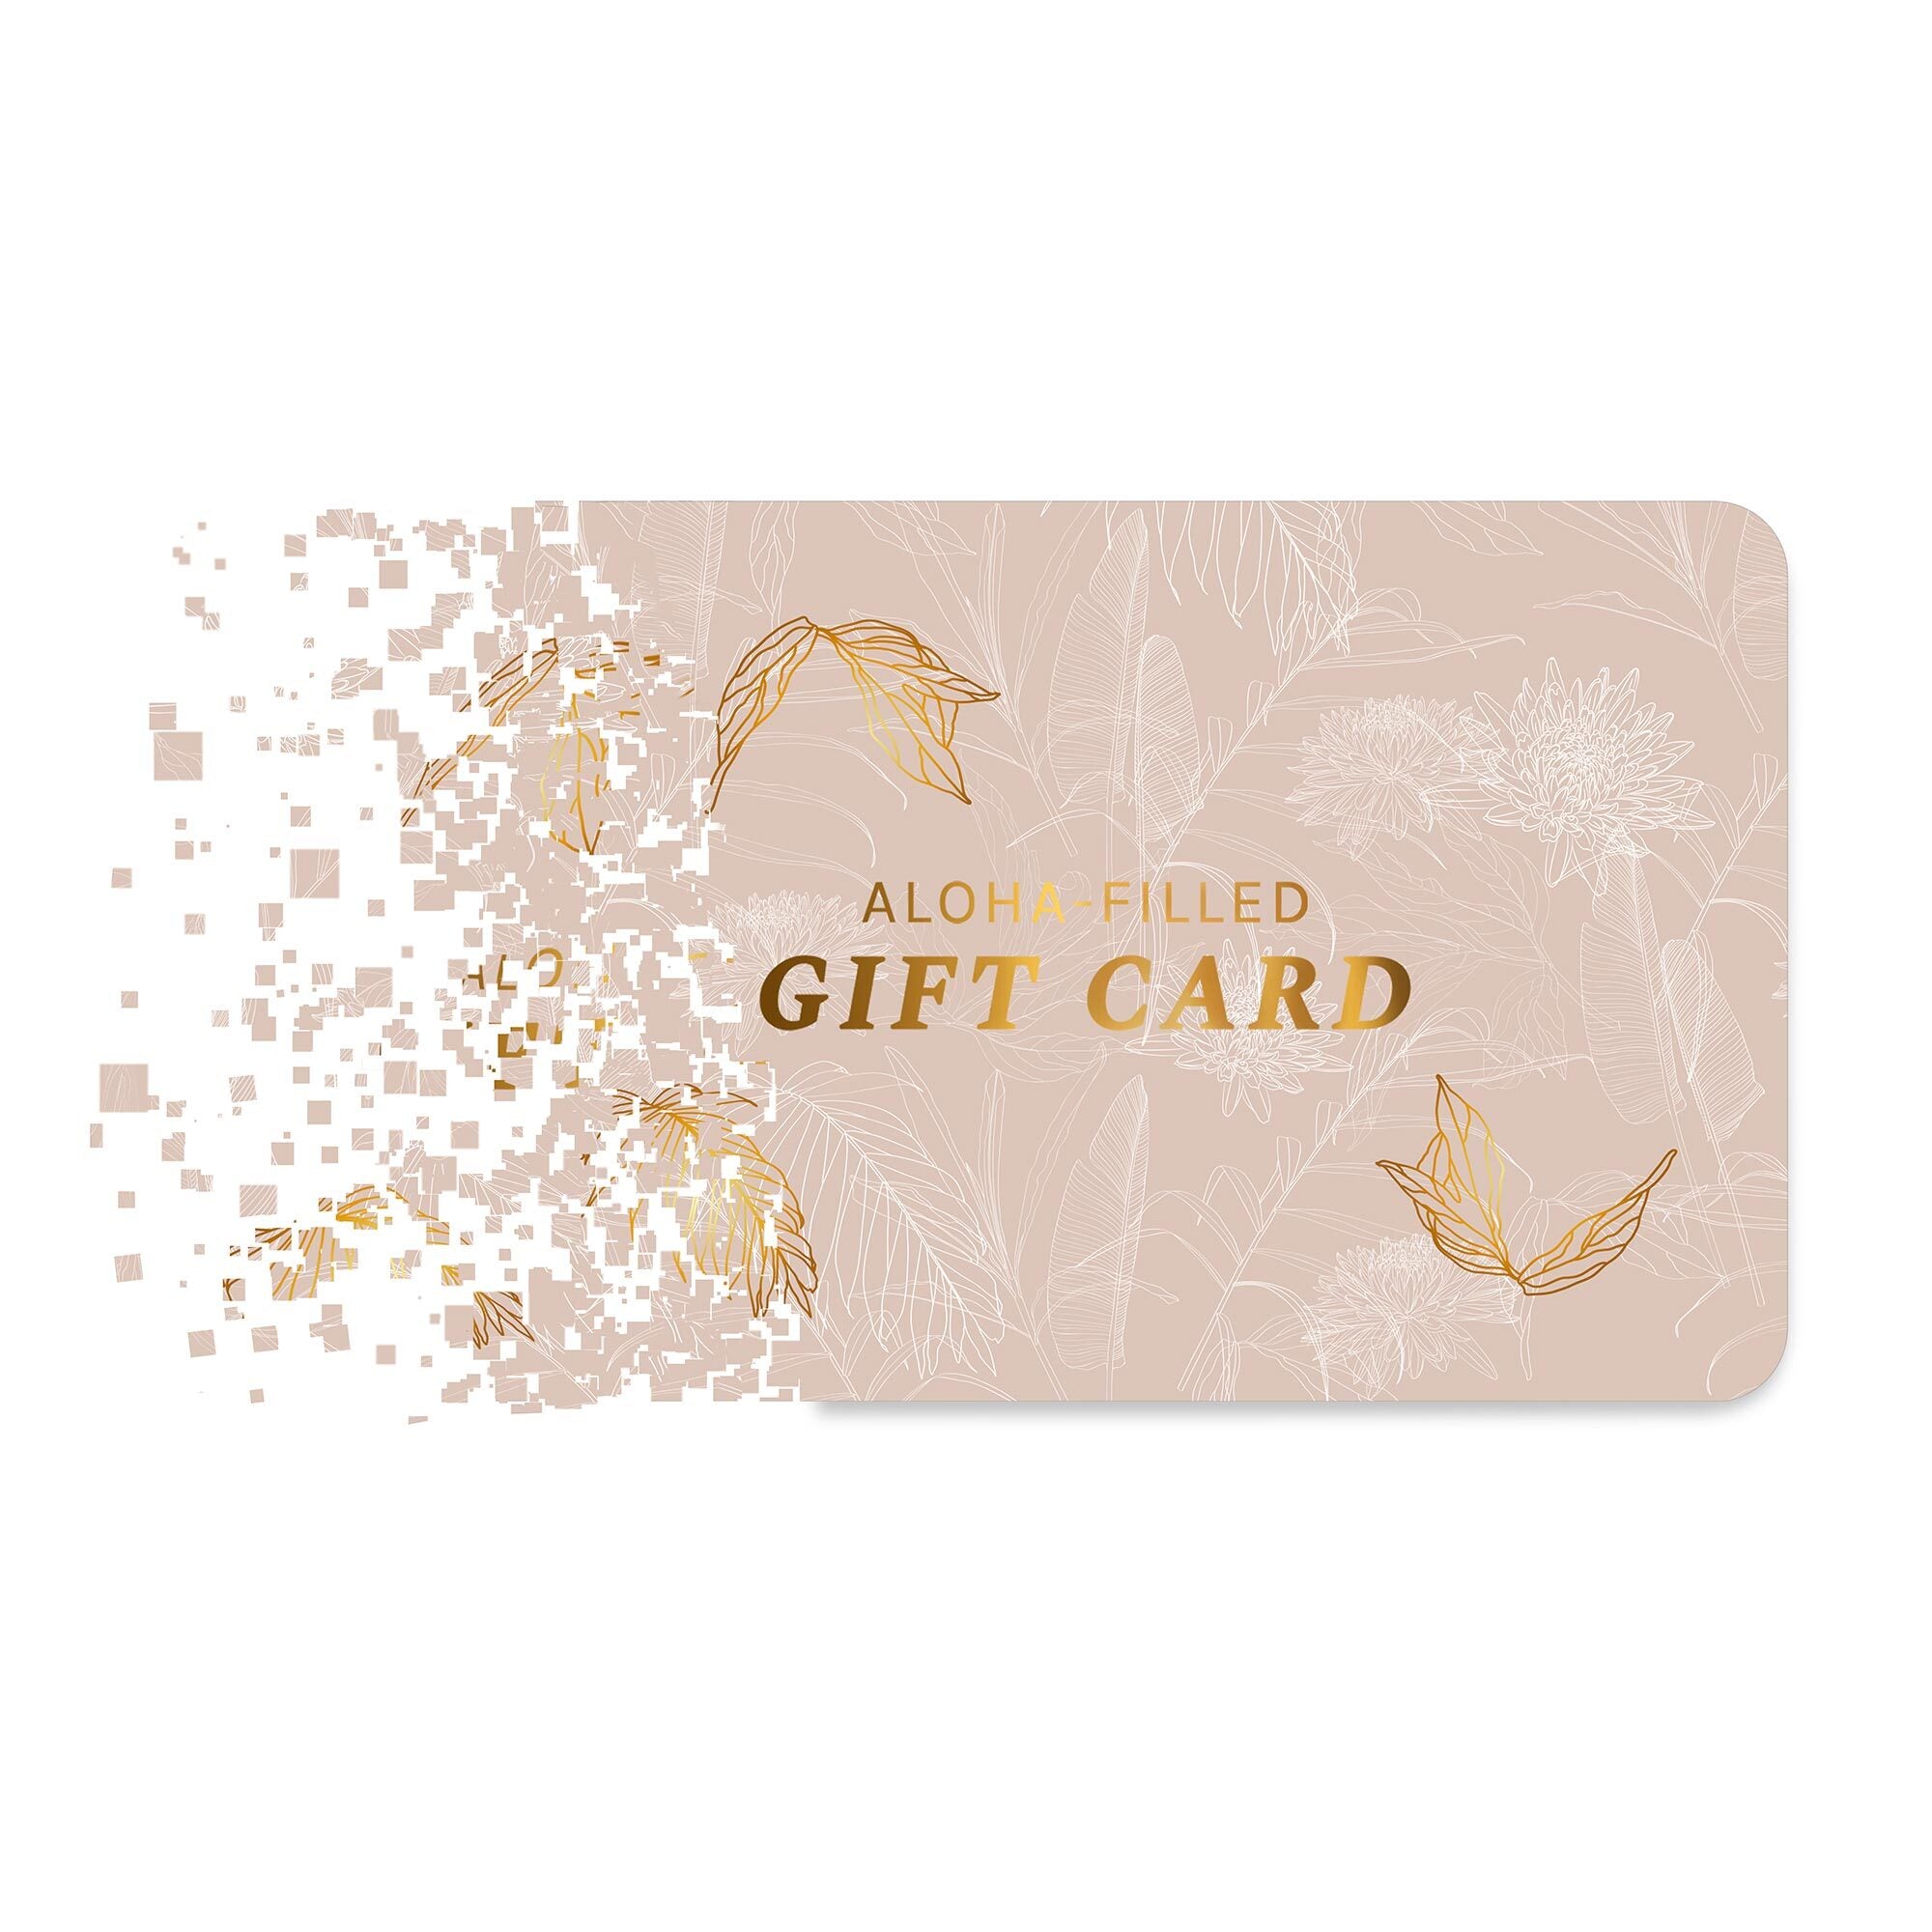 Gift Card by Email